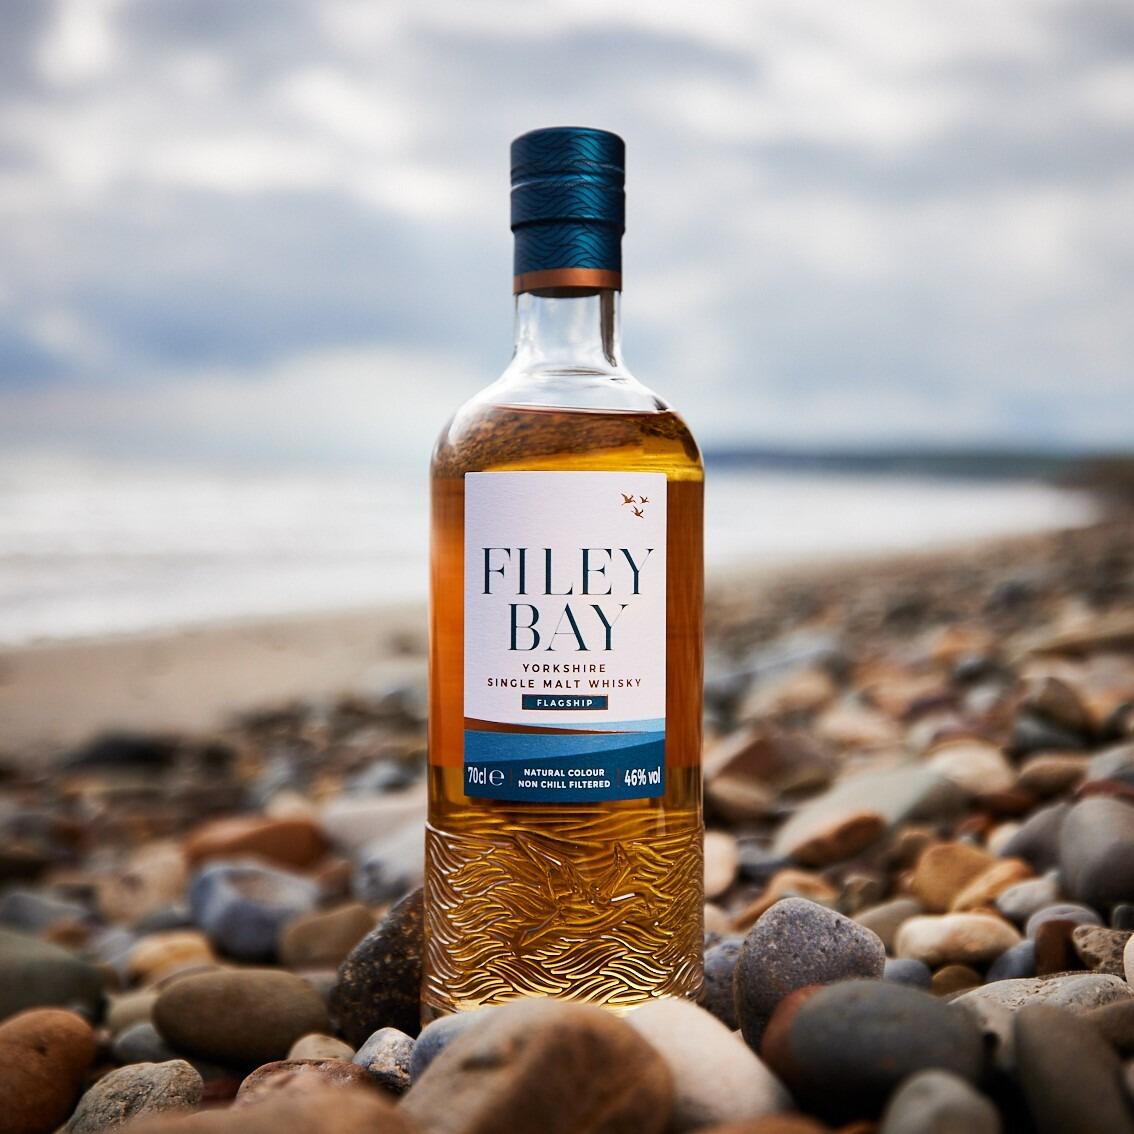 Hero shot of Filey Bay Whisky flagship bottle on the beach with stones in the foreground and the sweeping coastline in the background.